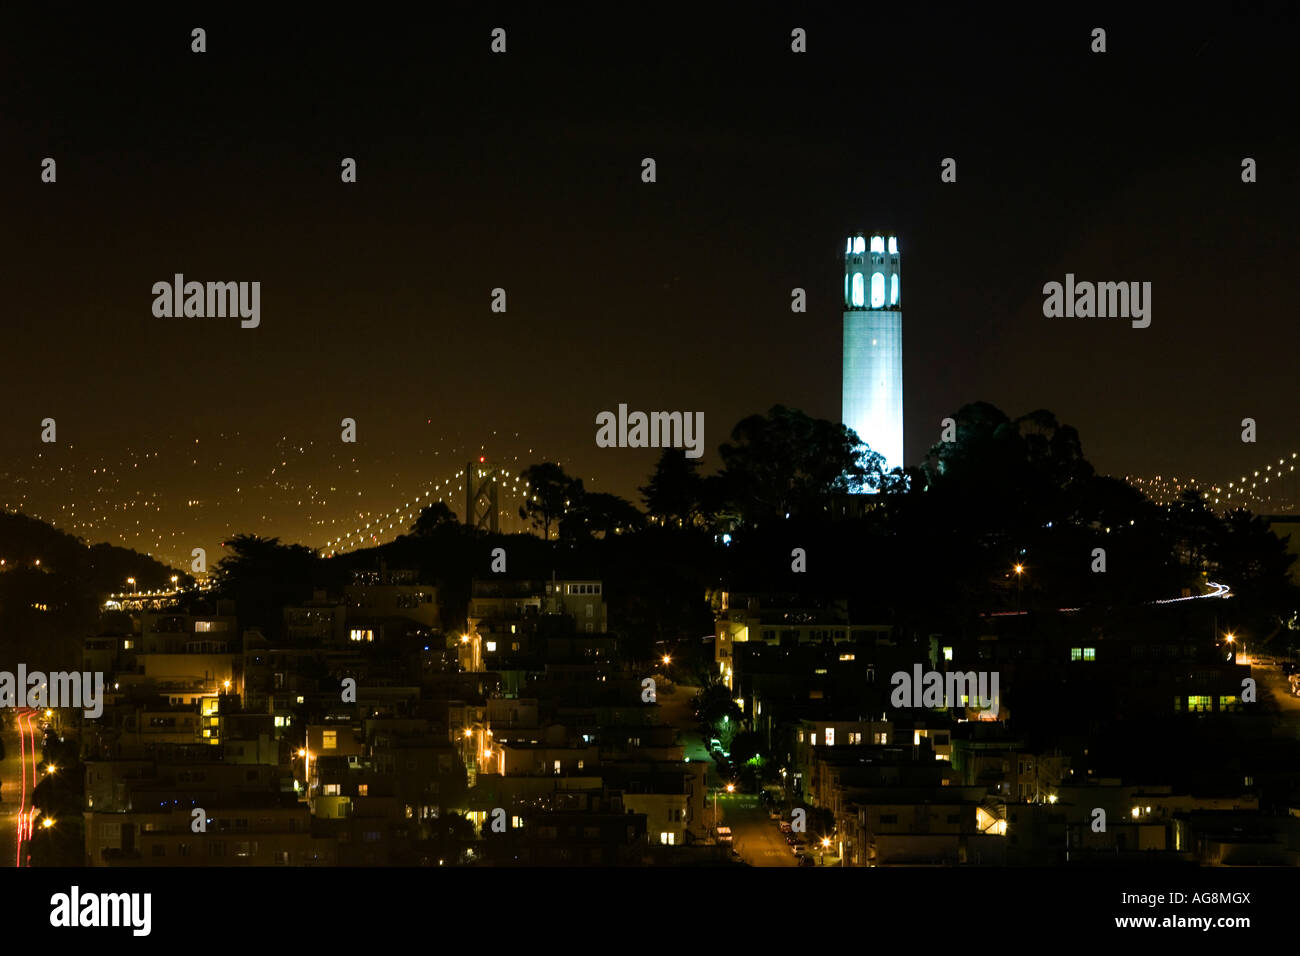 Coit Tower lit at night with the Bay bridge in the background and the homes streets of Telegraph hill in the foreground Stock Photo